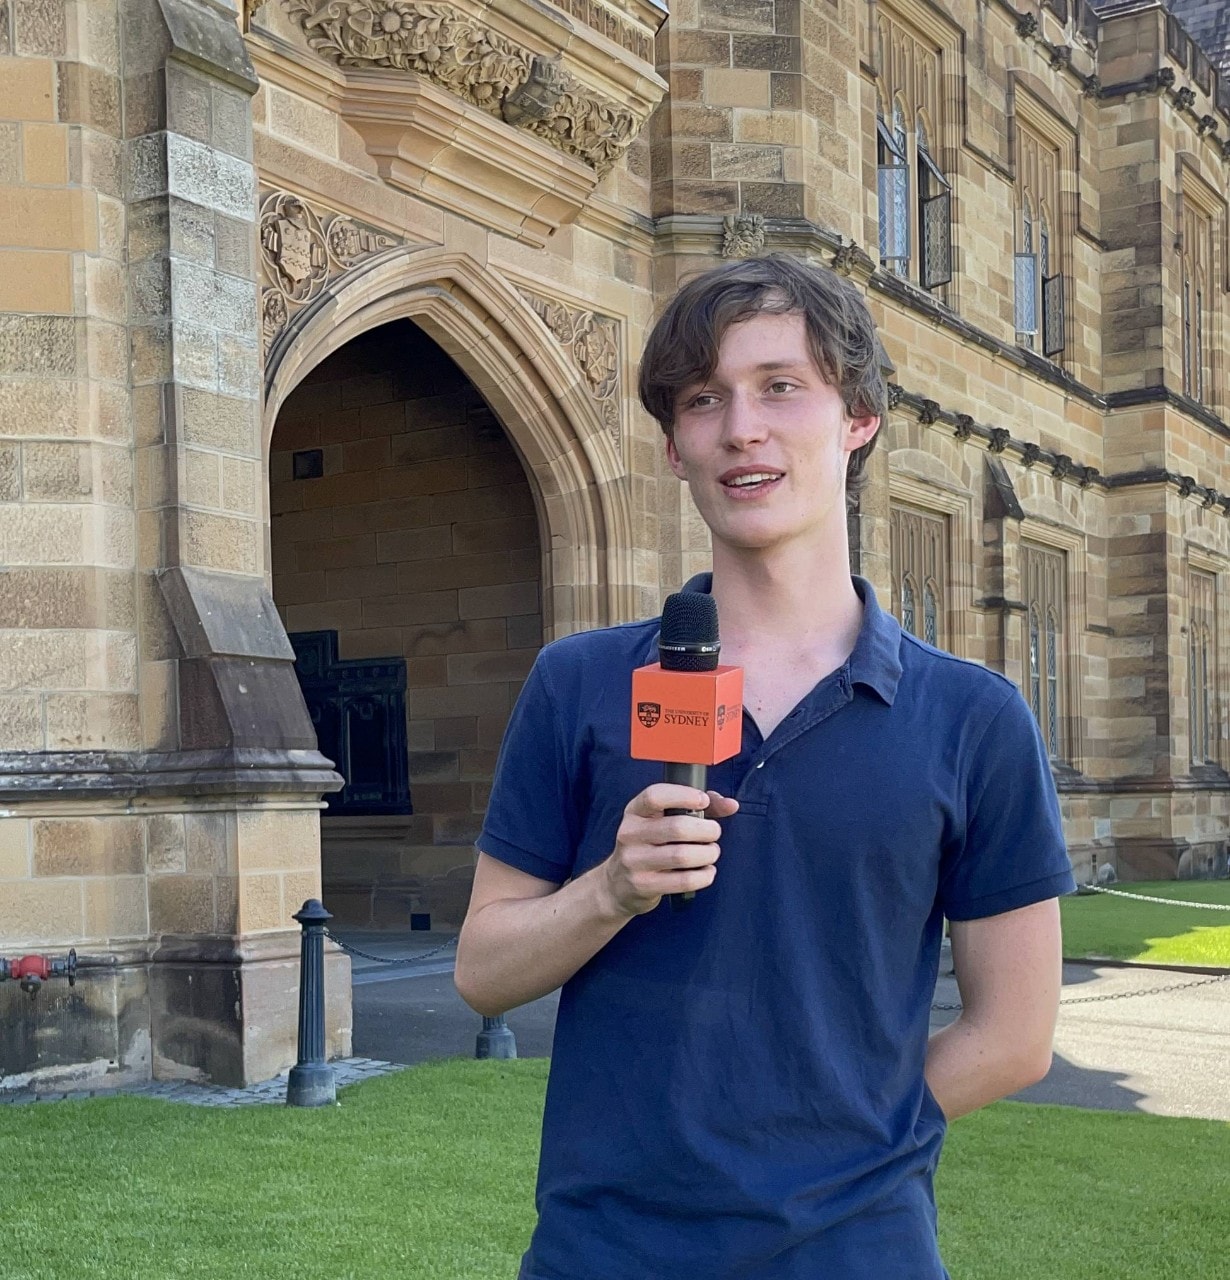 First year student Oscar standing at the front of the Main Quadrangle with a microphone